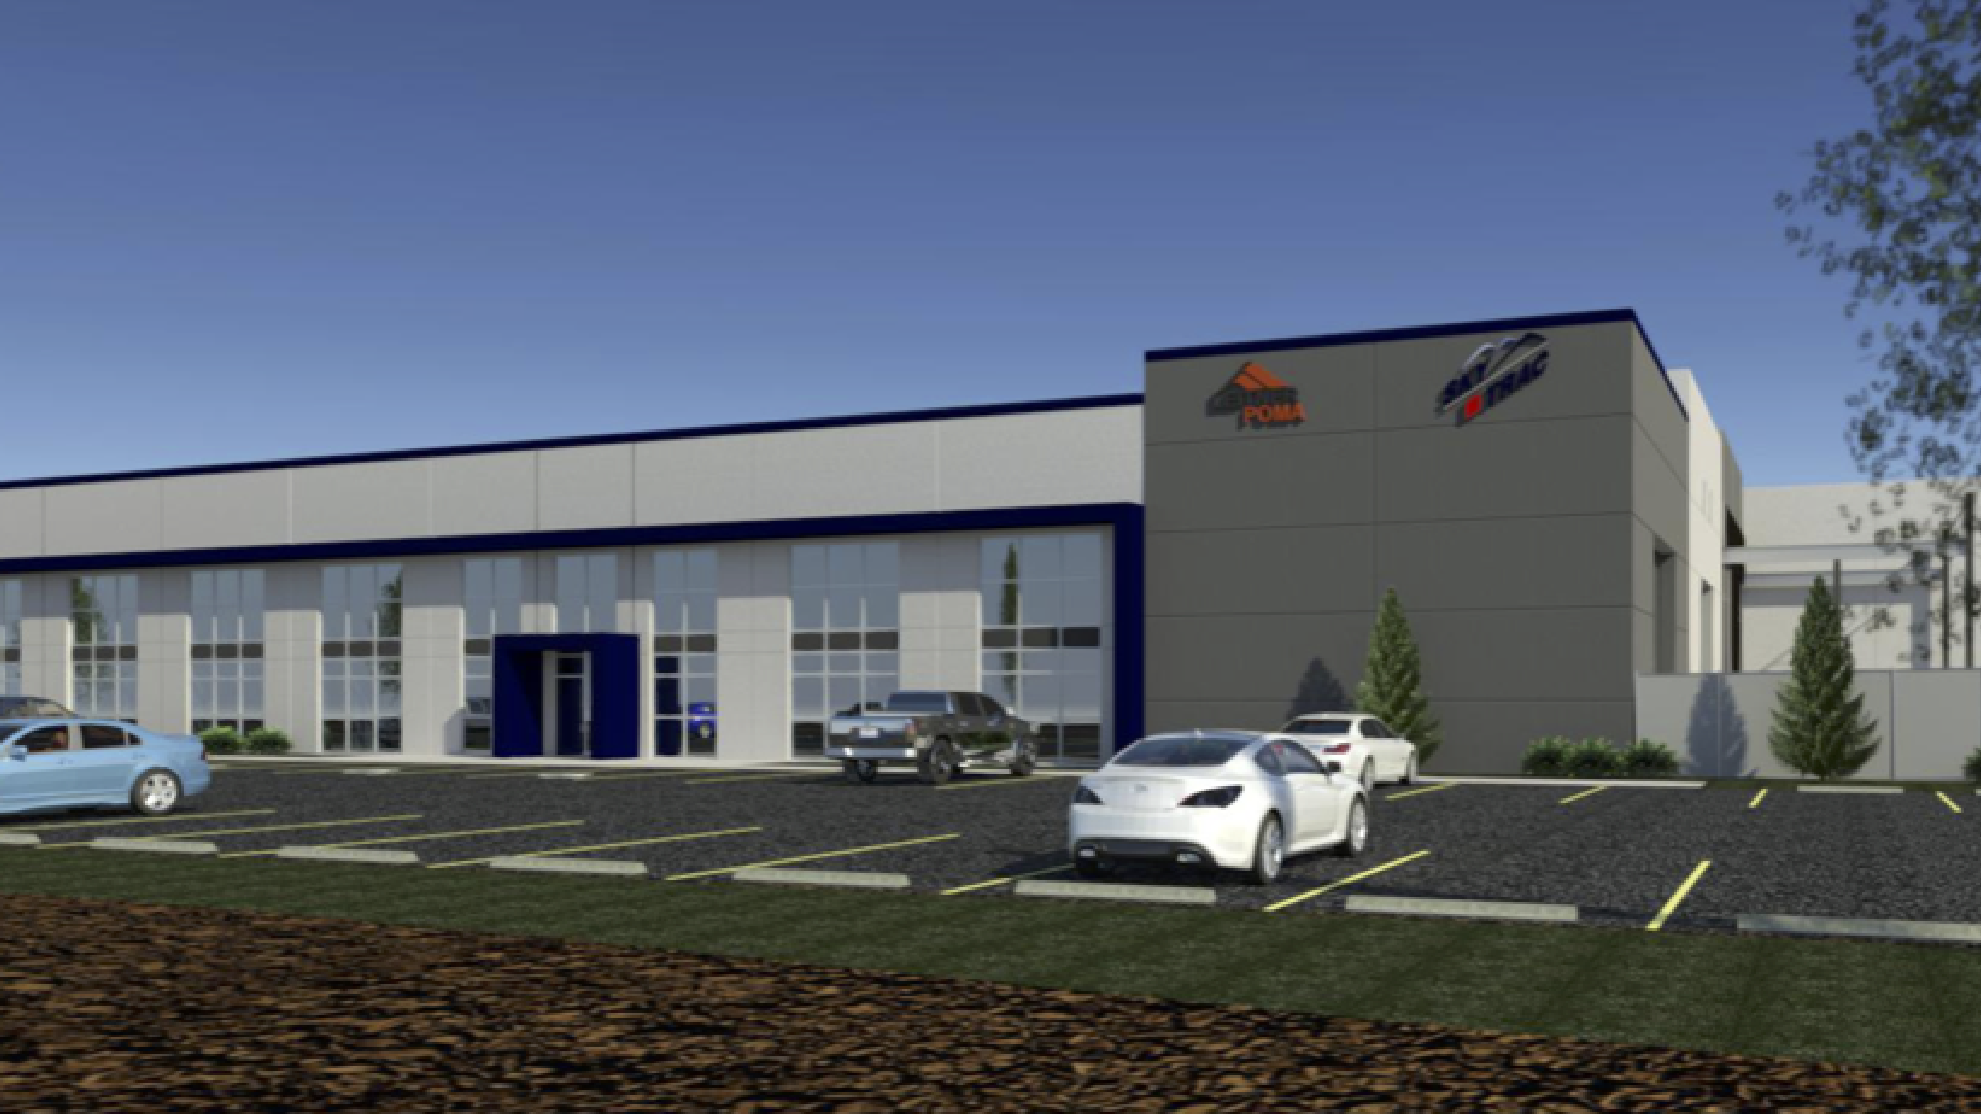 Featured image for “Leitner-Poma of America Expands With New Facility in Tooele City”